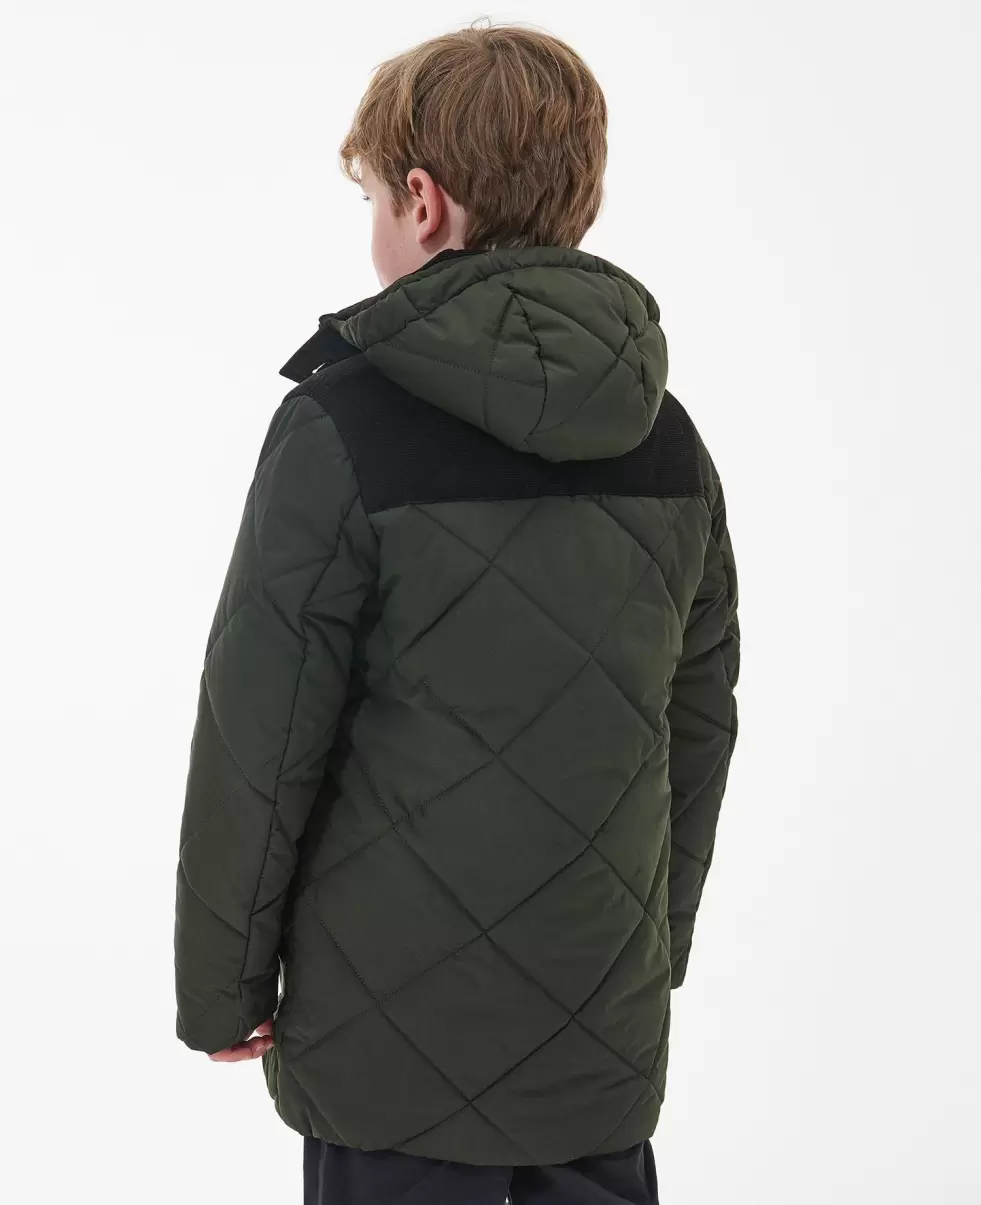 Green Inviting Quilted Jackets Kids Barbour Boys' Elmwood Quilted Jacket - 3